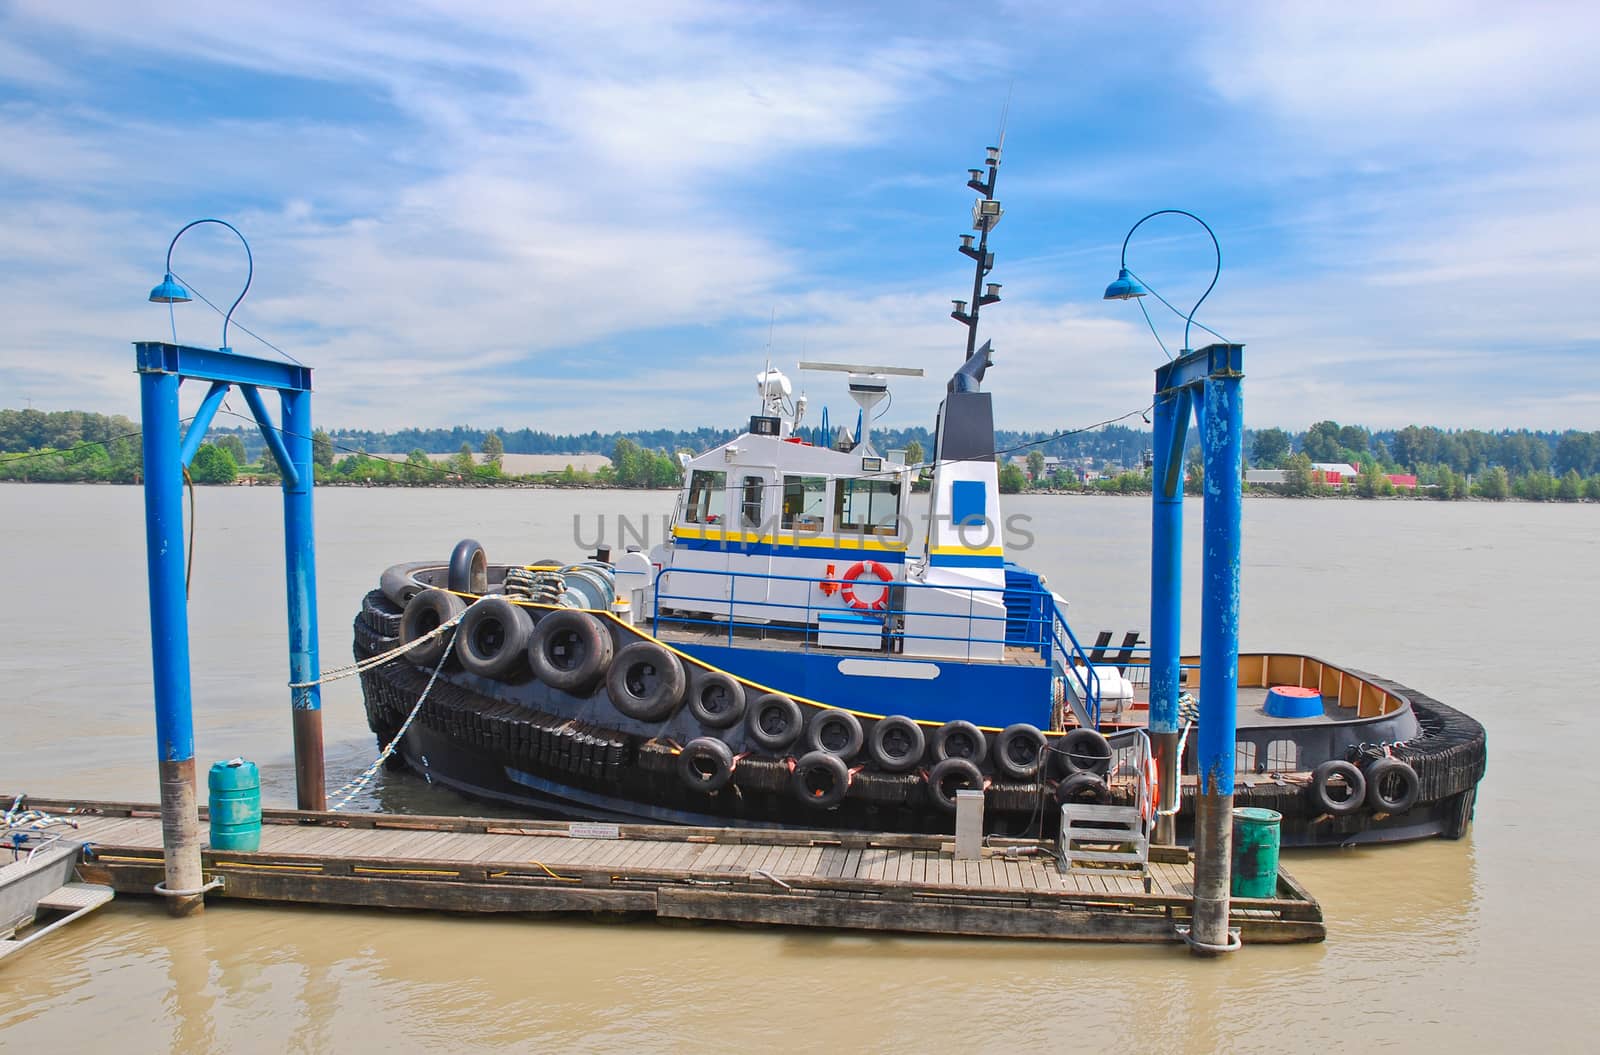 Small towboat moored at river pier on cloudy sky background by Imagenet